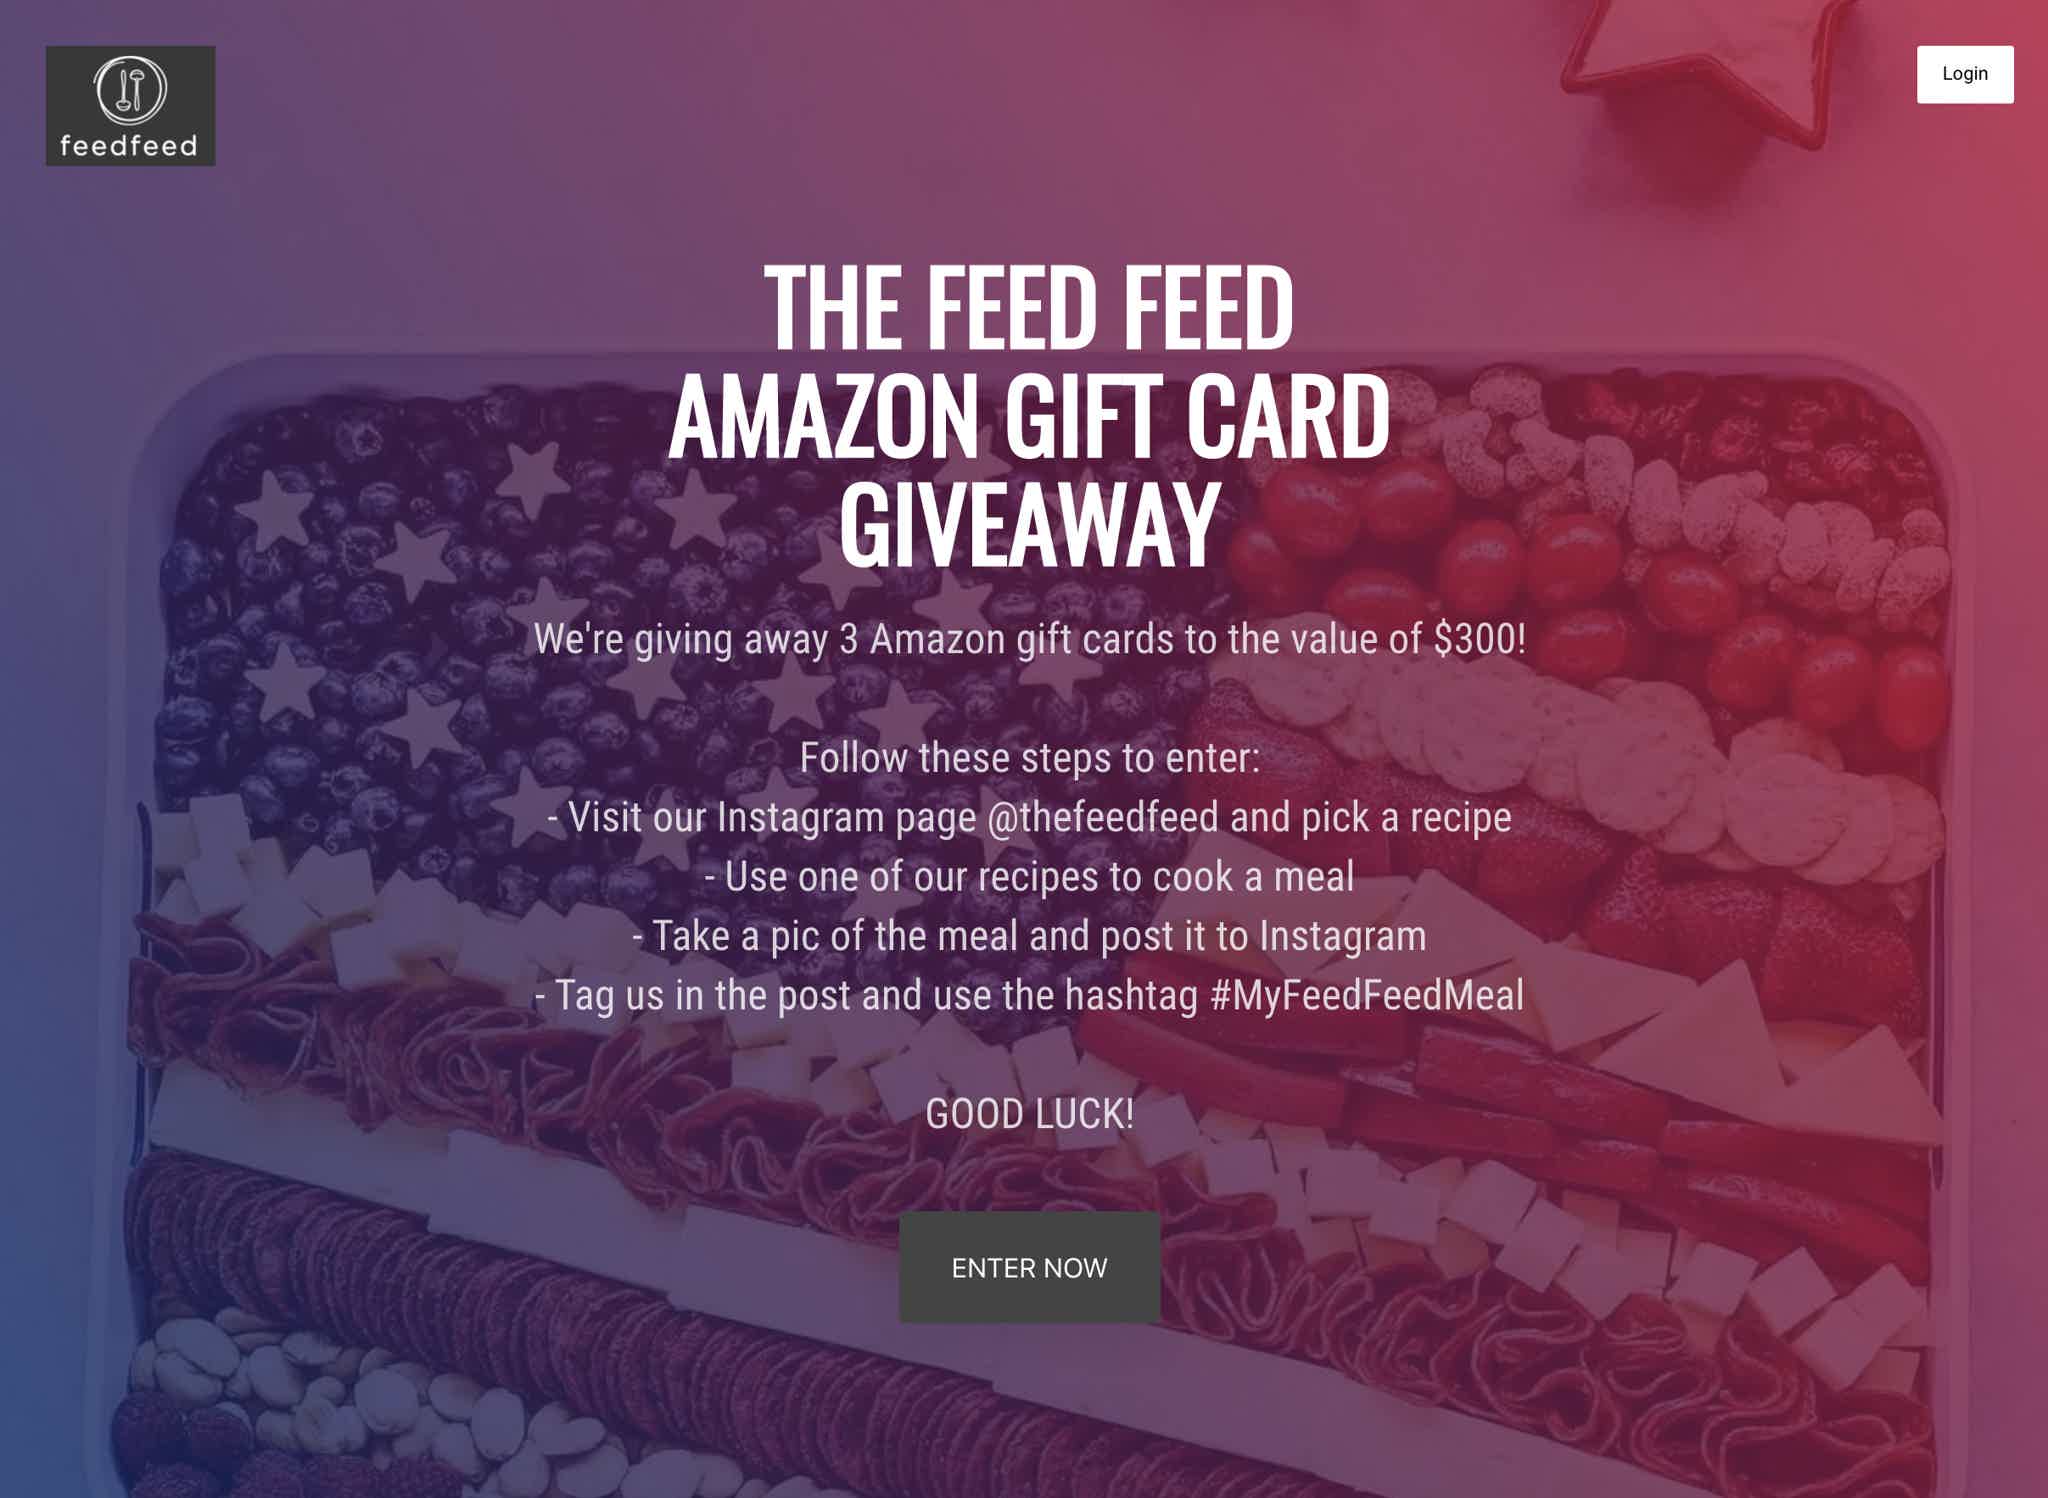 Host A Giveaway For An Amazon Gift Card (2021) The Feed Feed Amazon Gift Card Giveaway